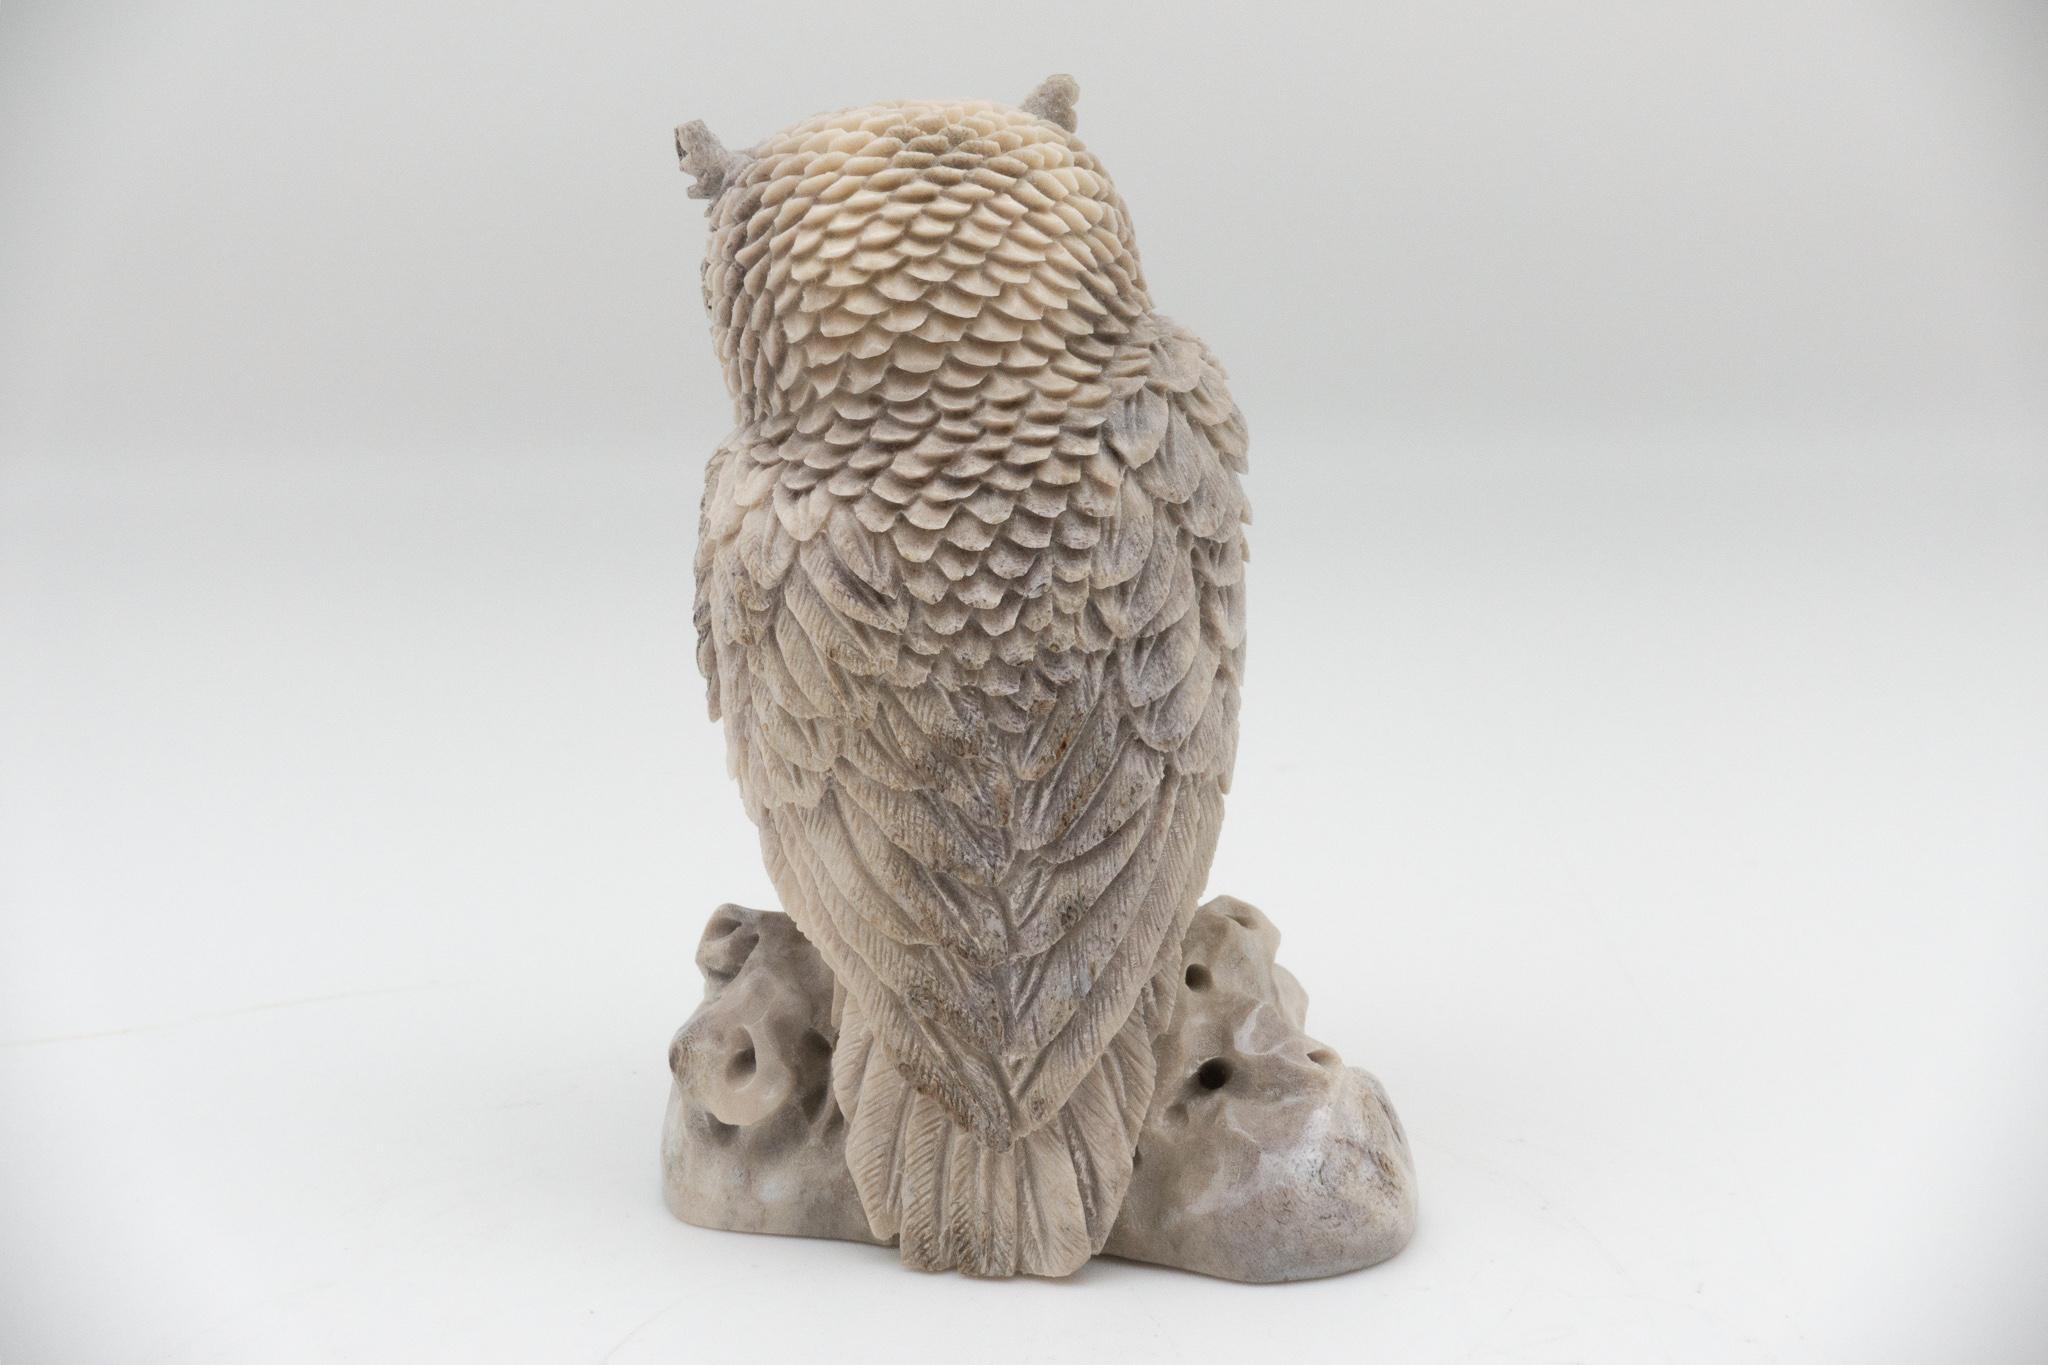 Moose antler carving of a horned owl. Antler was sourced in North America, then sent to Asia for carving. Quality of ivory, but with sustainability, as the moose naturally shed their antlers.